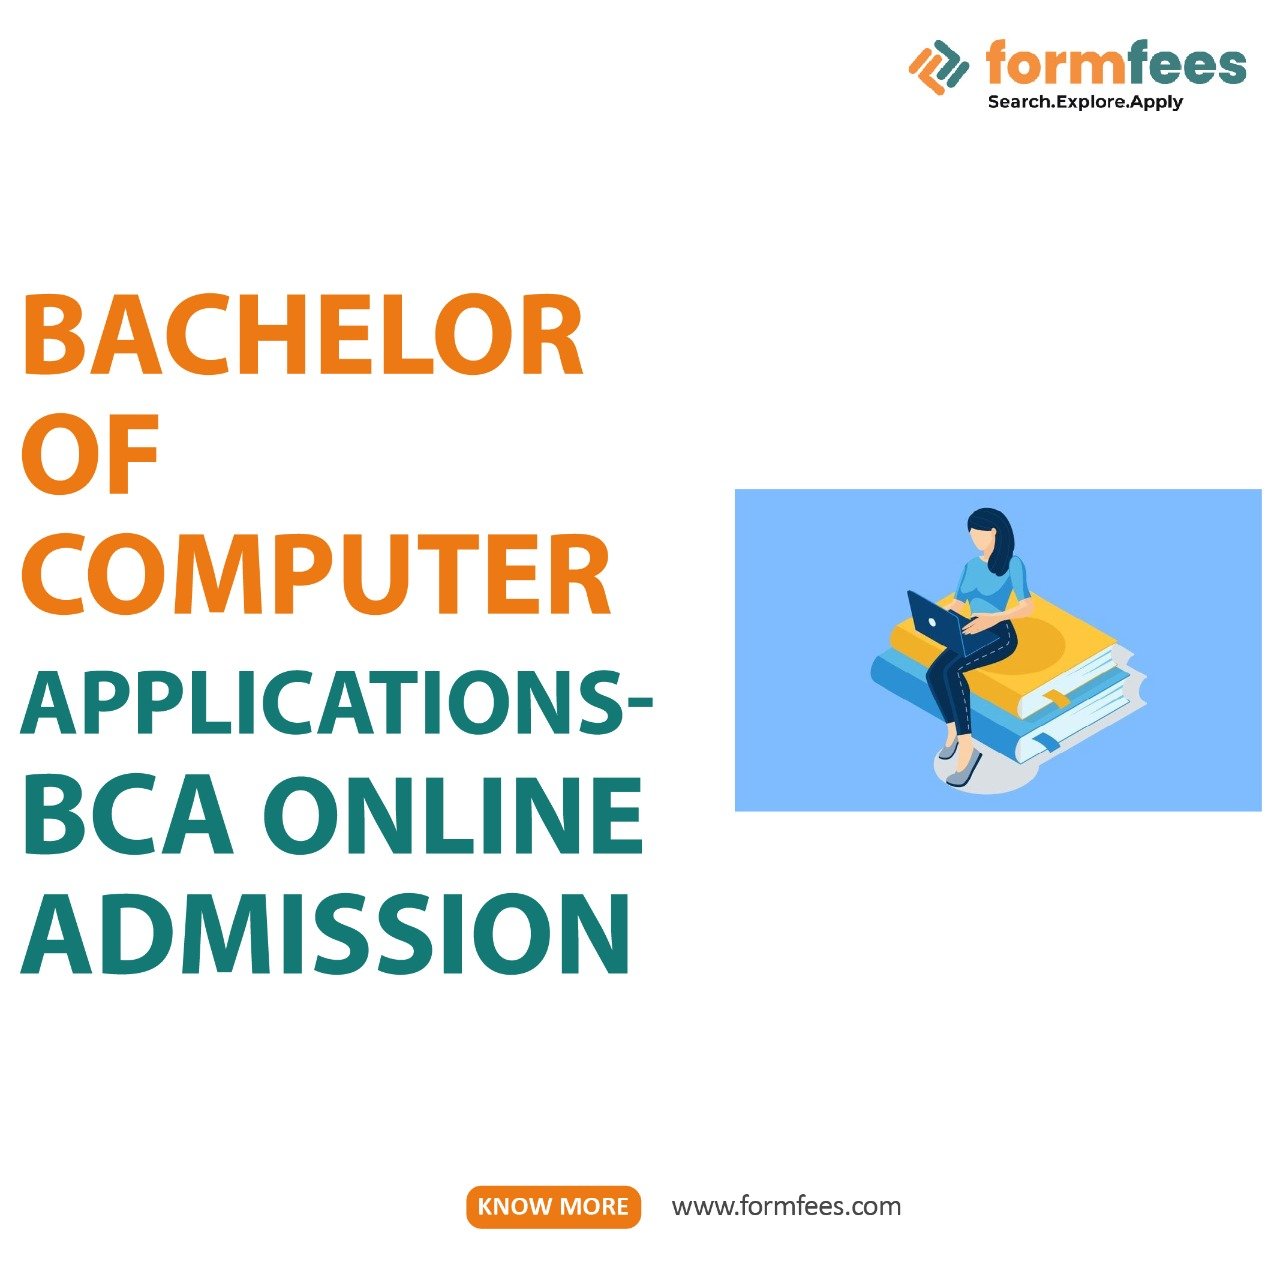 Bachelor of Computer Applications- BCA Online Admission